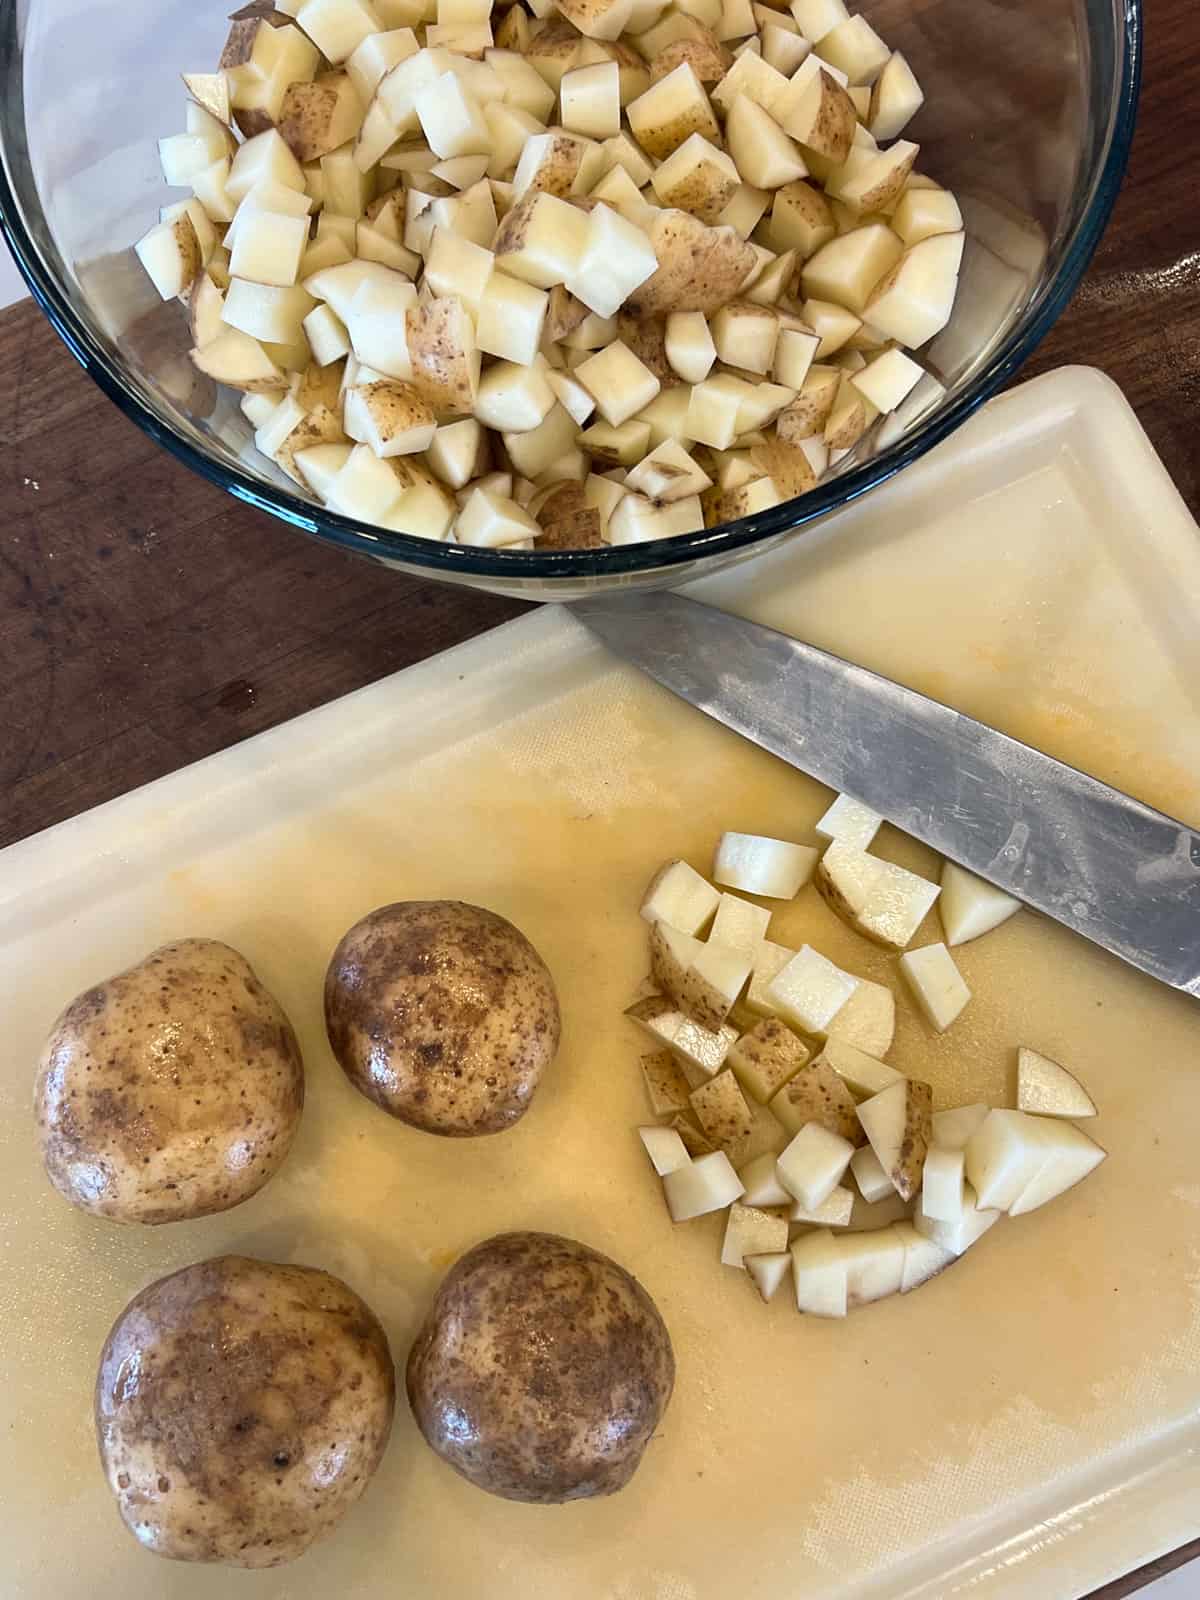 Diced potatoes in a glass bowl next to a cutting board with a knife and potatoes partially chopped.